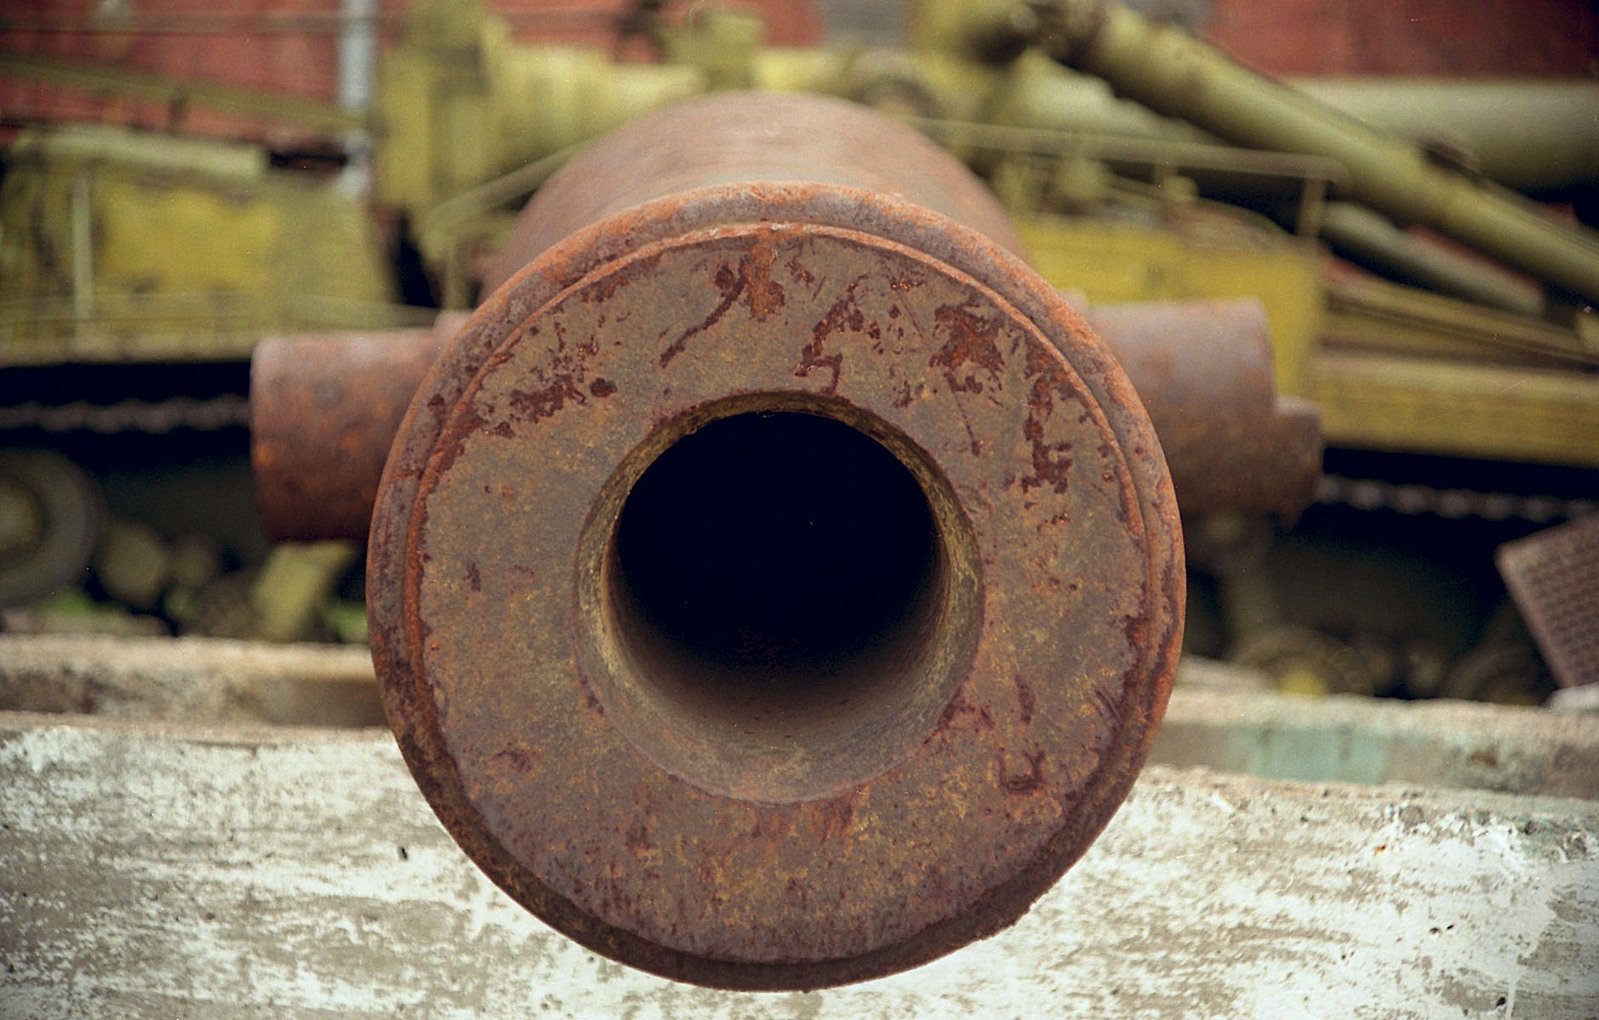 an old rusty metal object on display